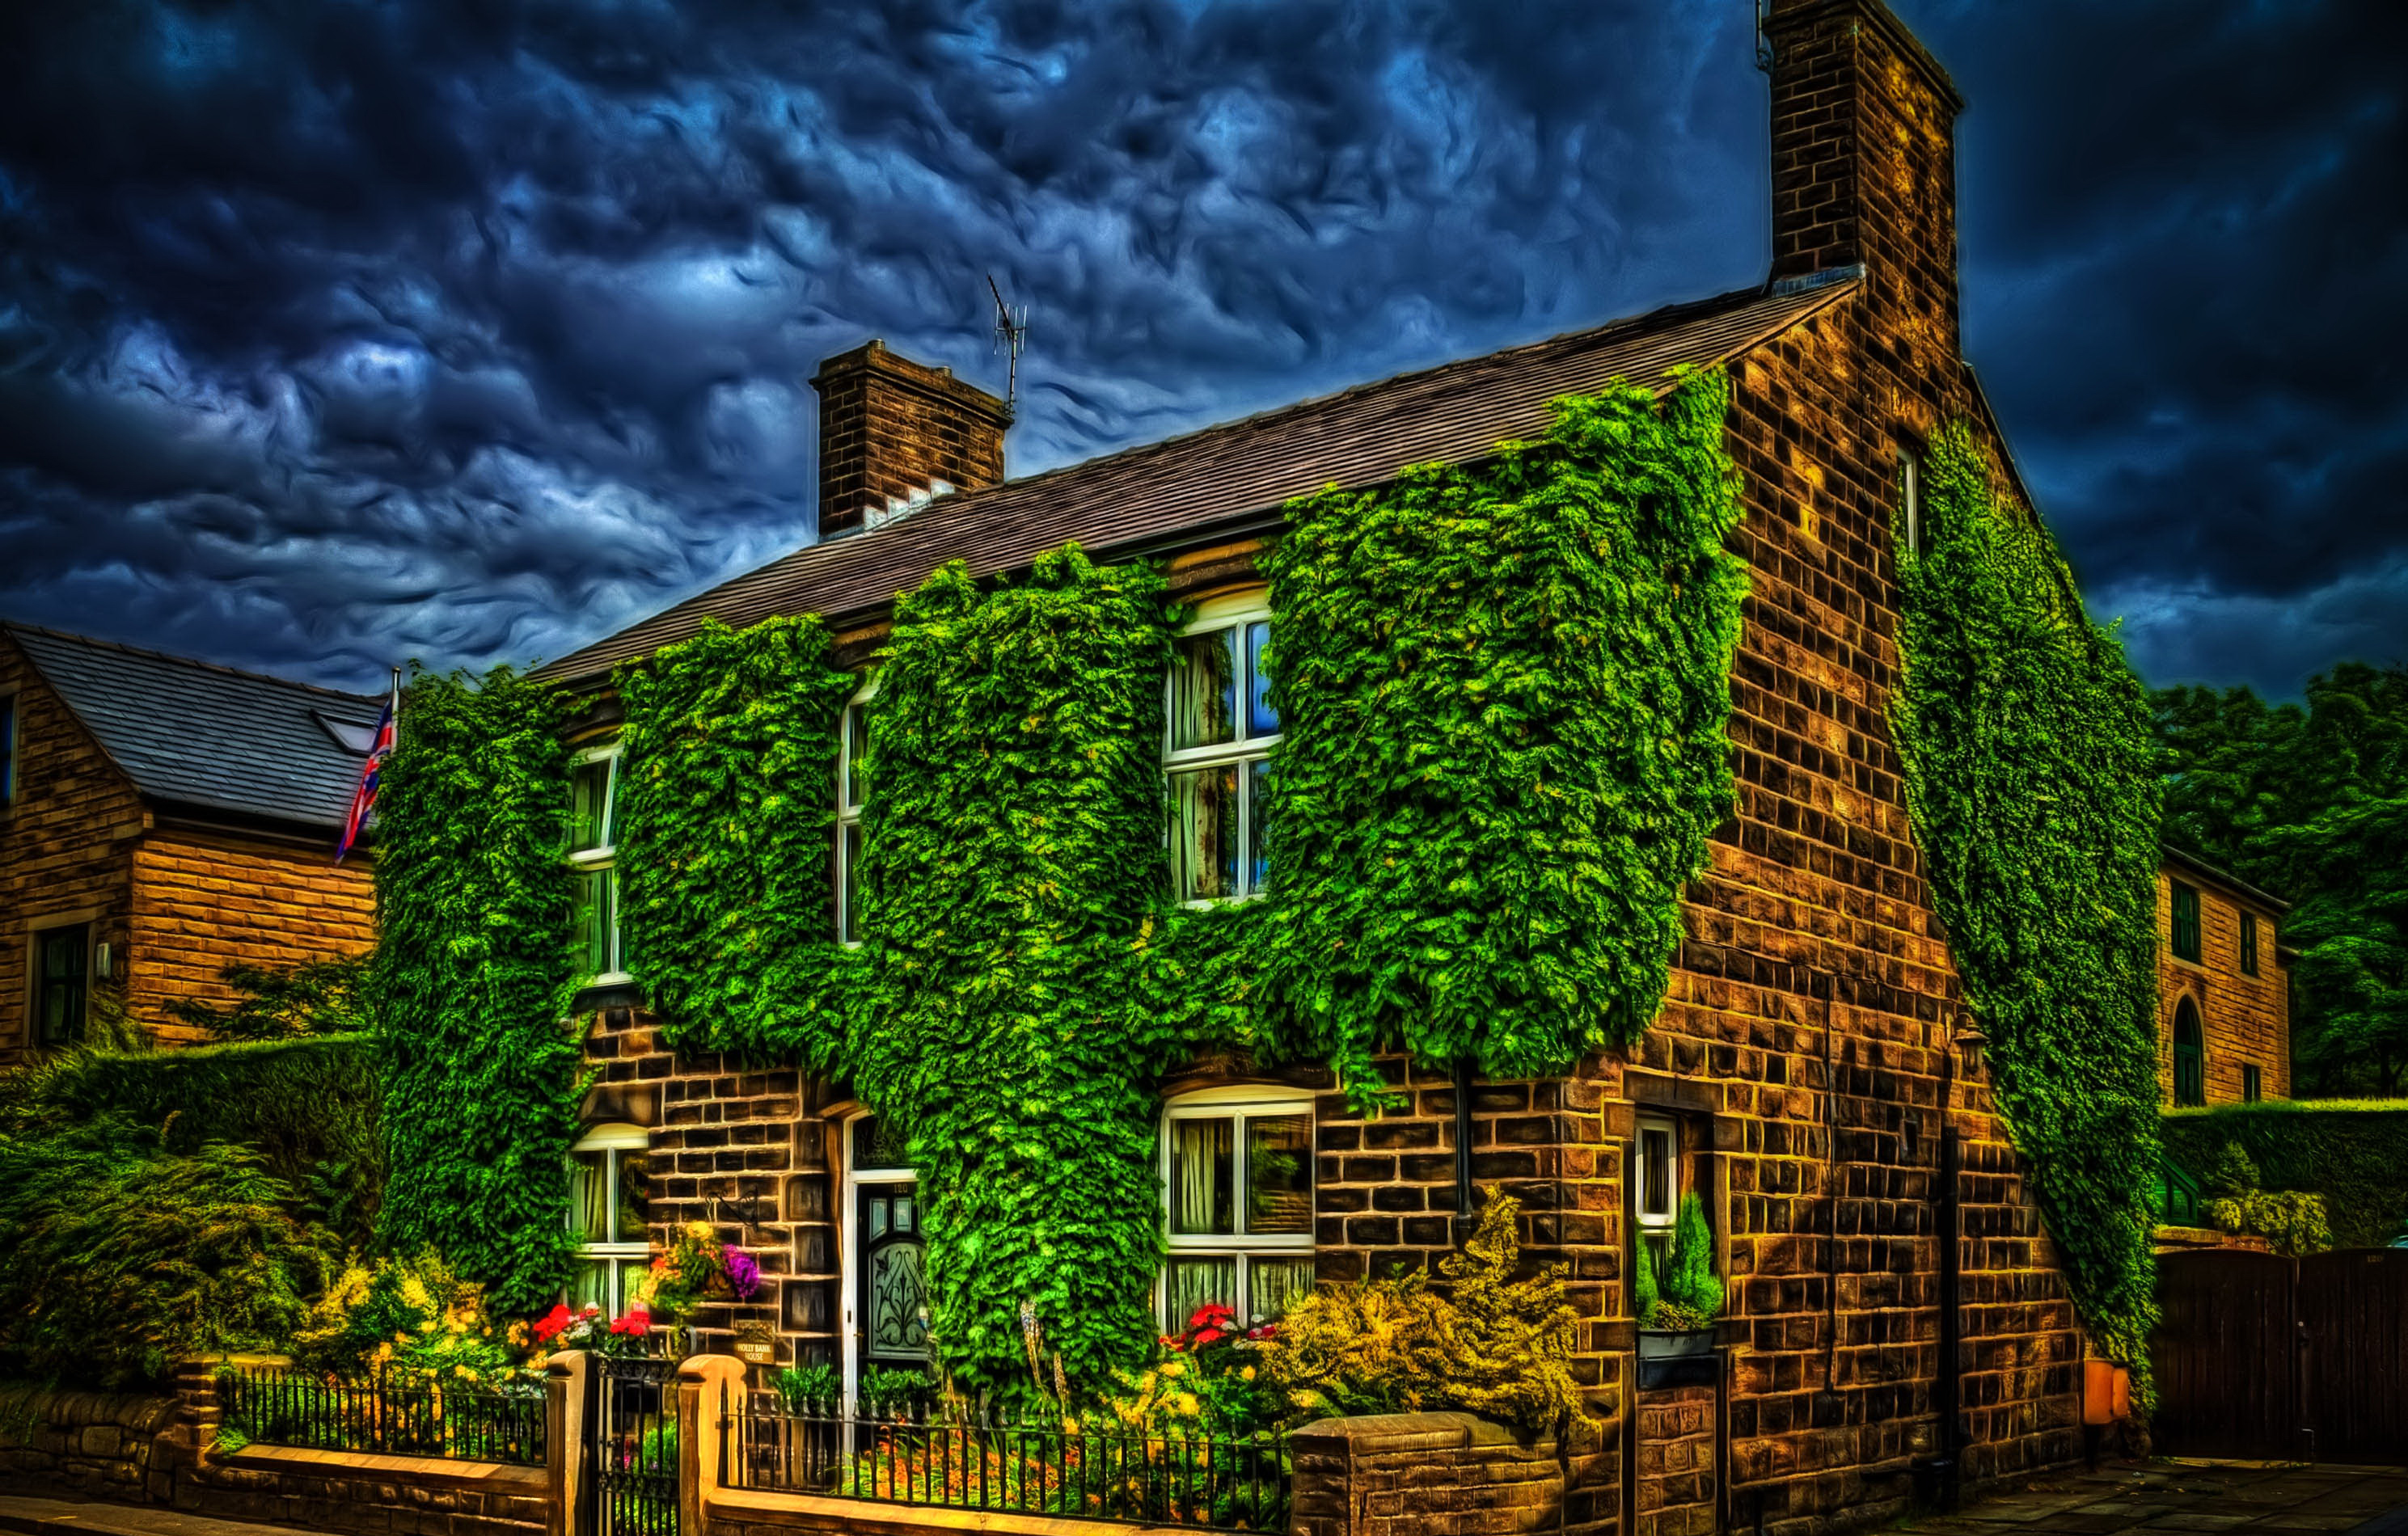 green, england, brick, photography, hdr, architecture, house, leaf, vine